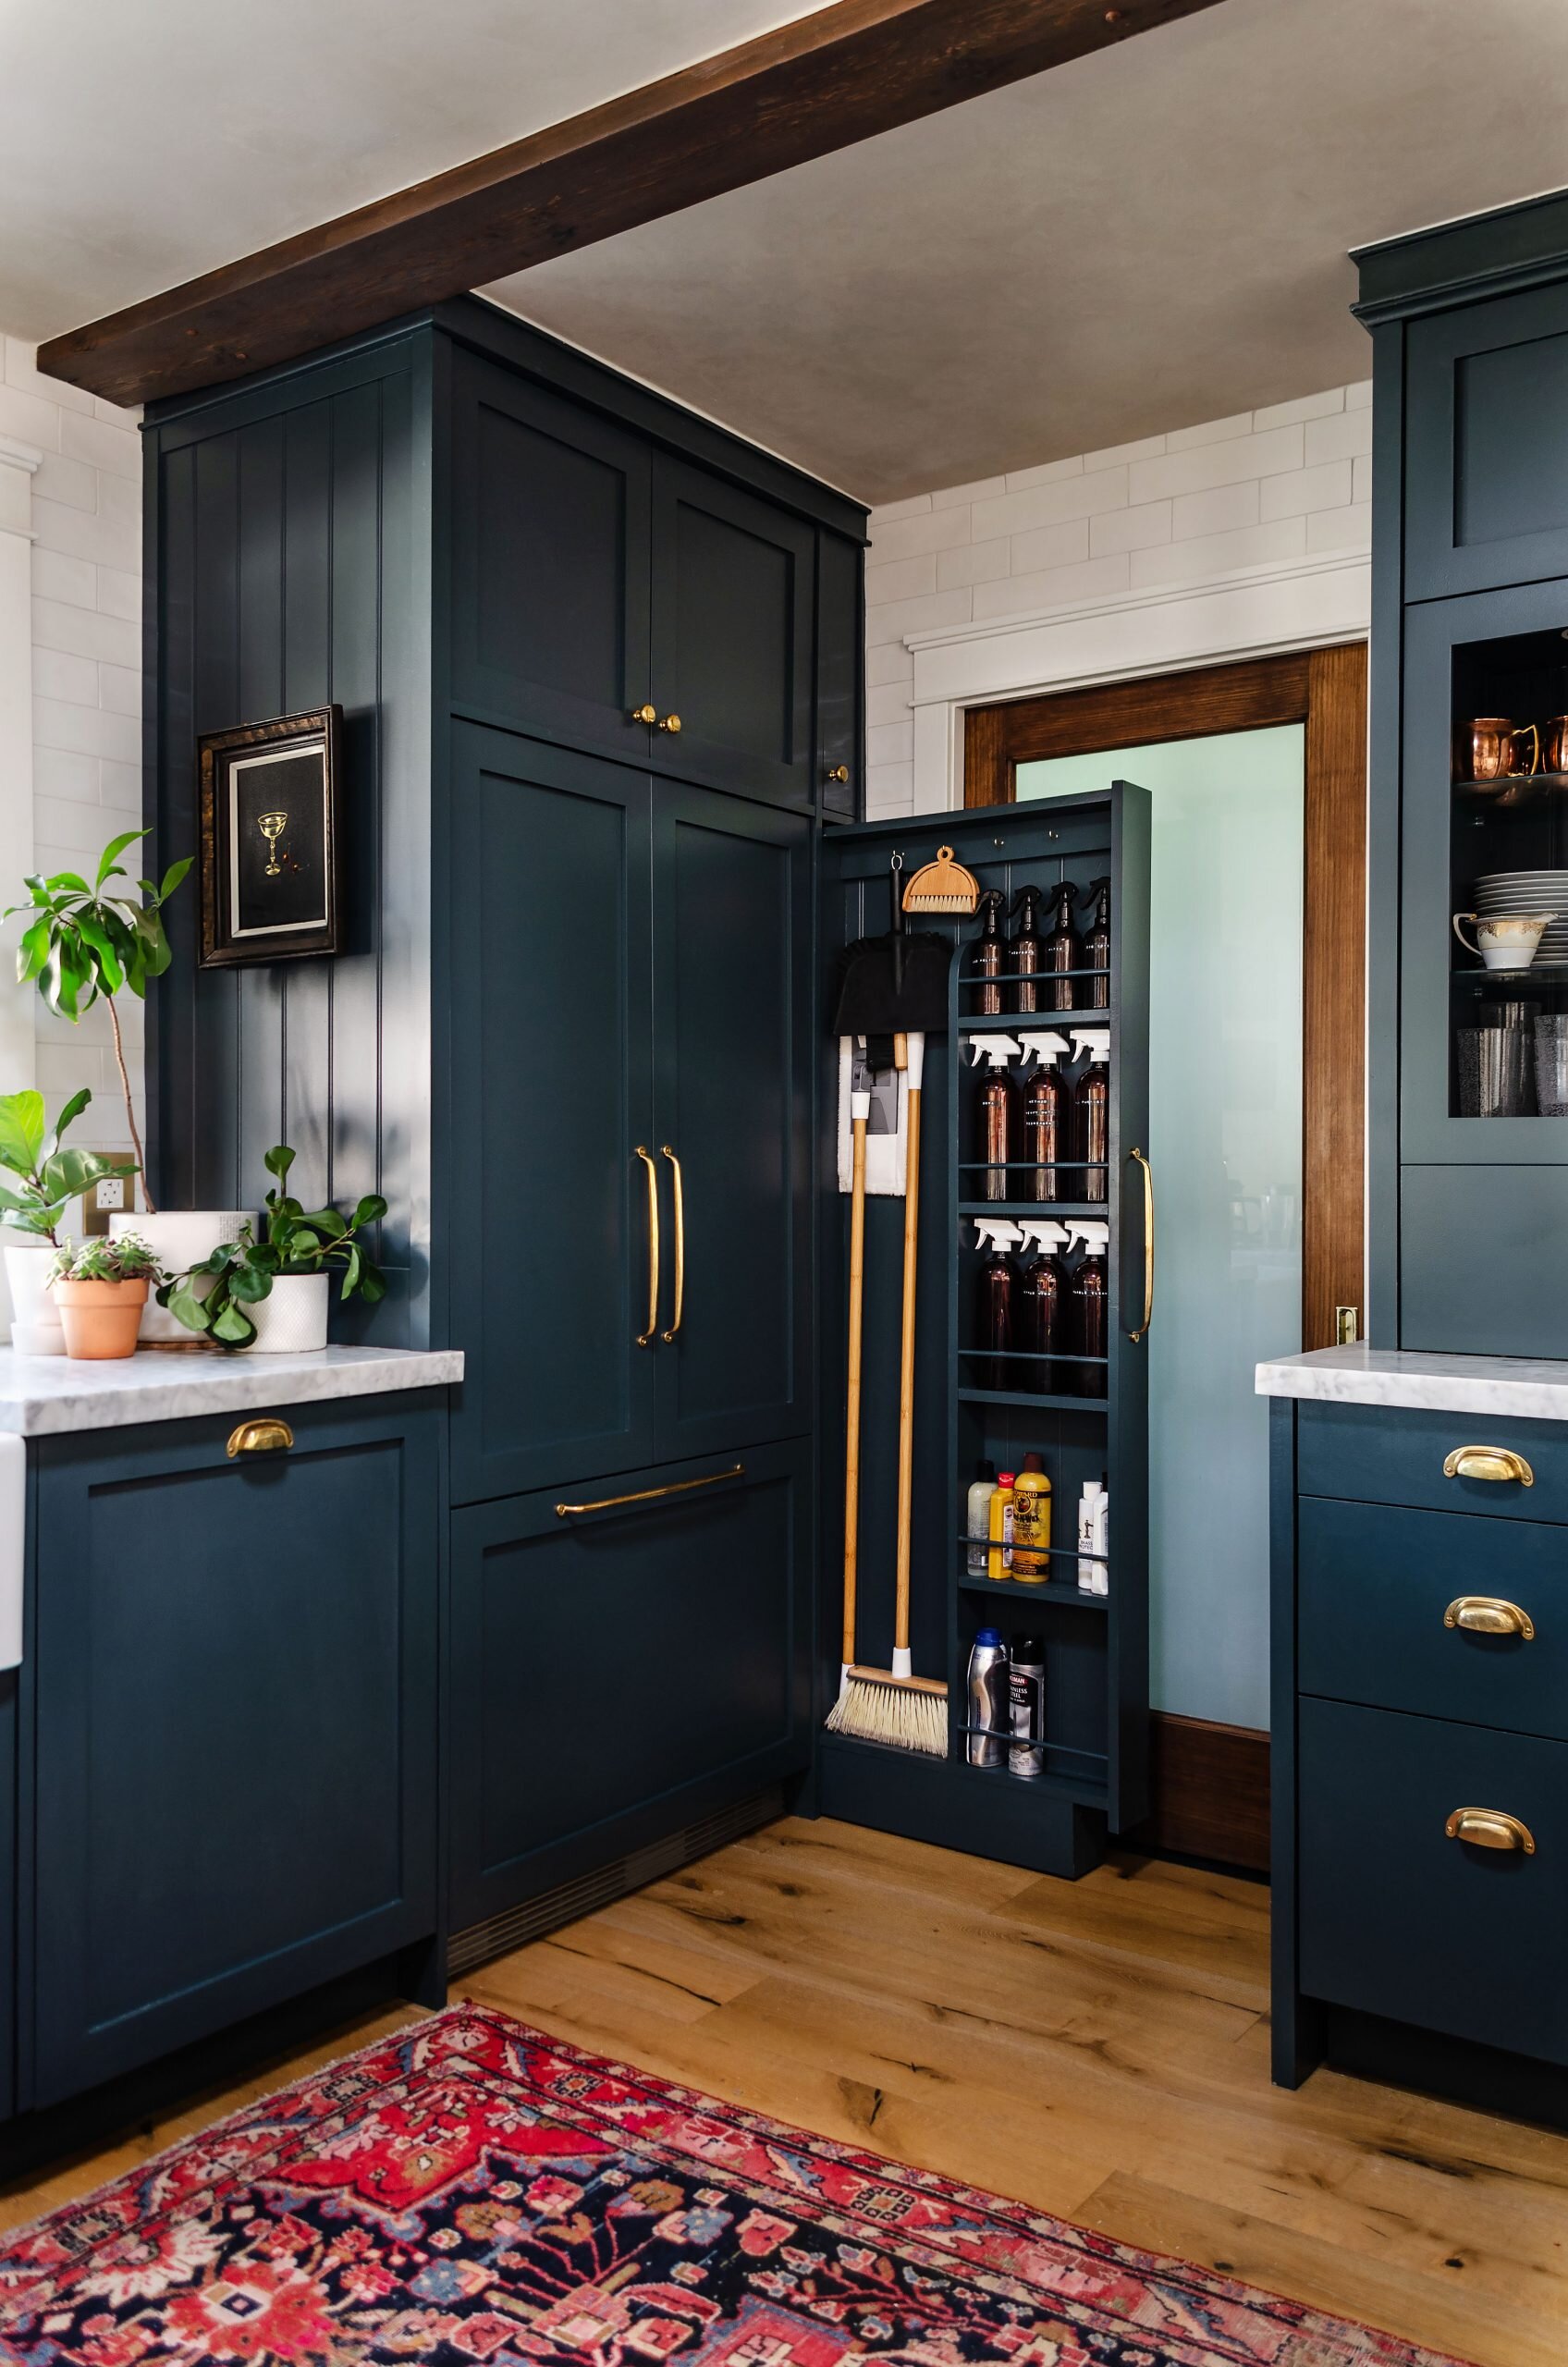 Pull out broom and cleaning cabinet in the kitchen. How to add a slim cleaning cabinet in the kitchen or laundry room. | Image via Renovate108